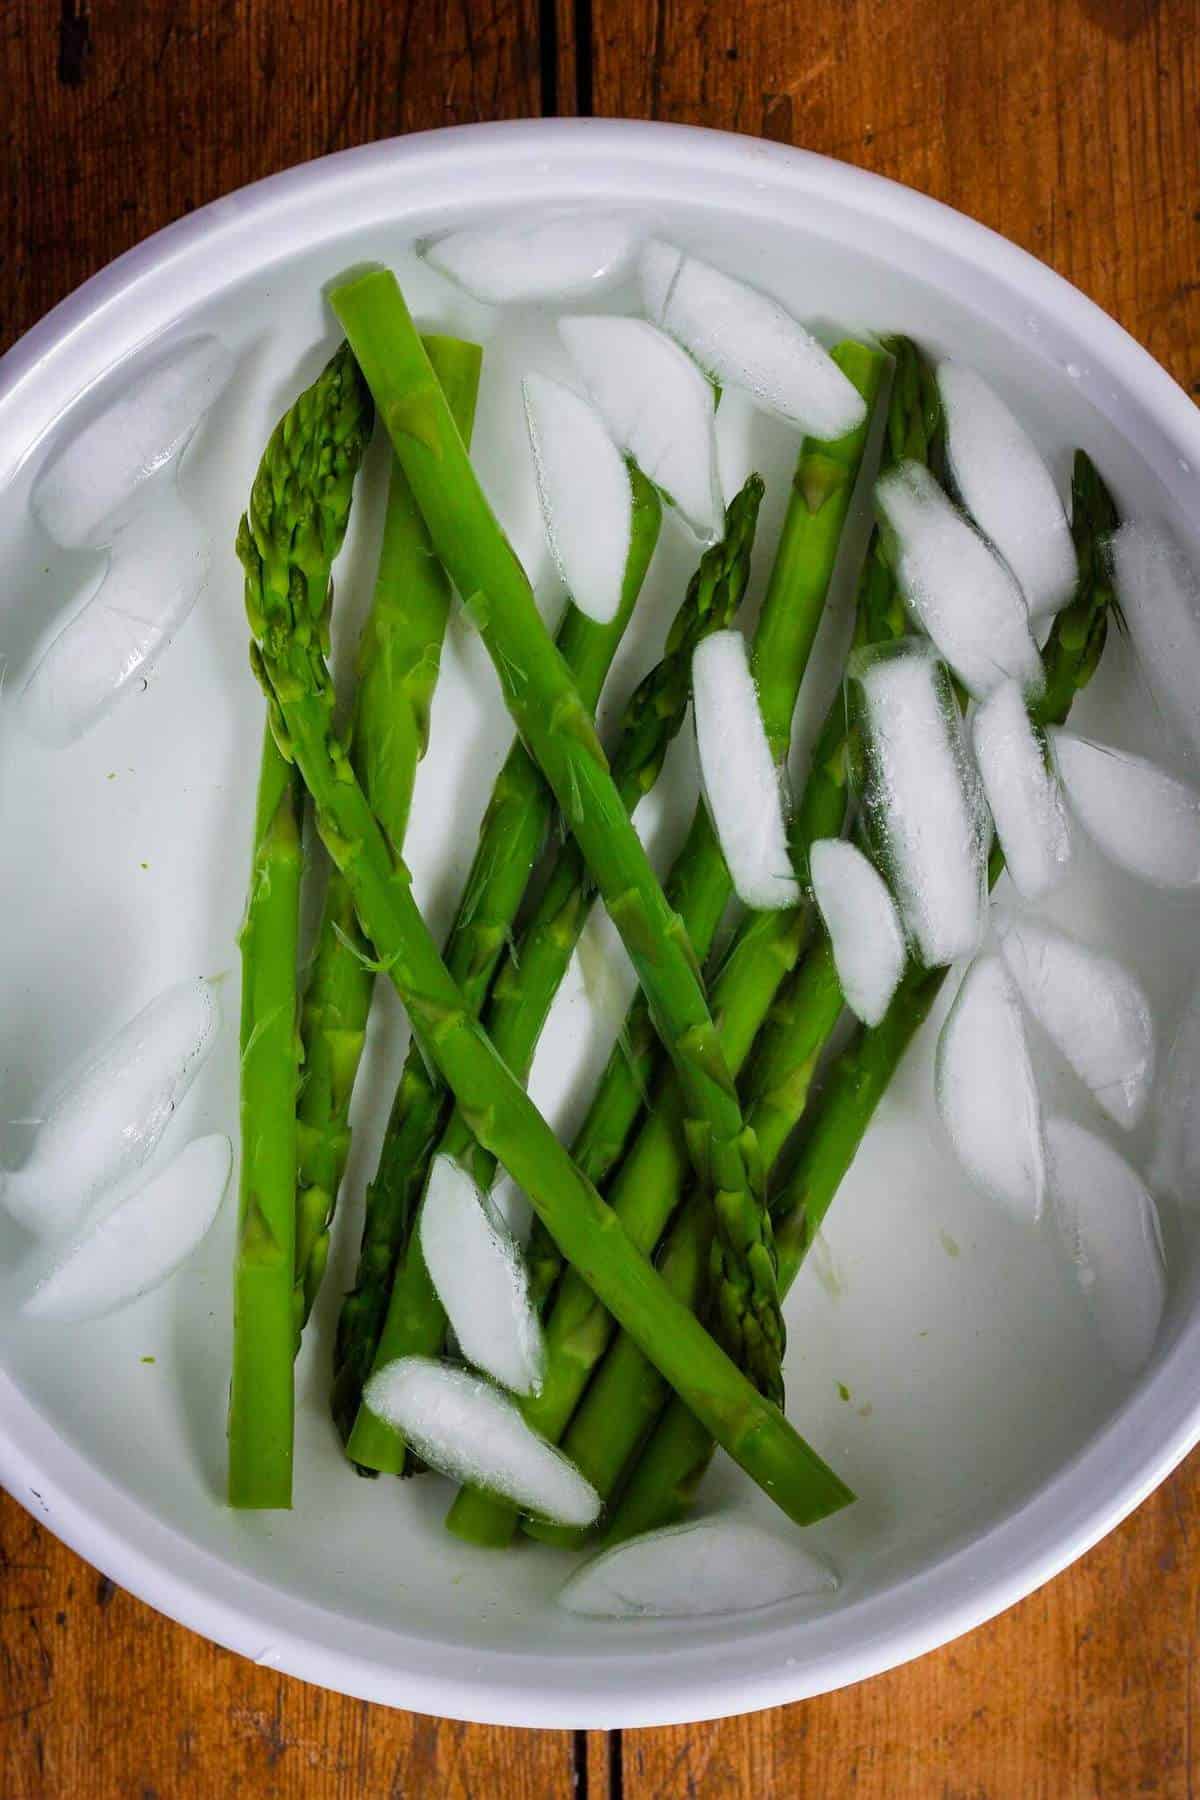 Blanched asparagus in ice water bath.